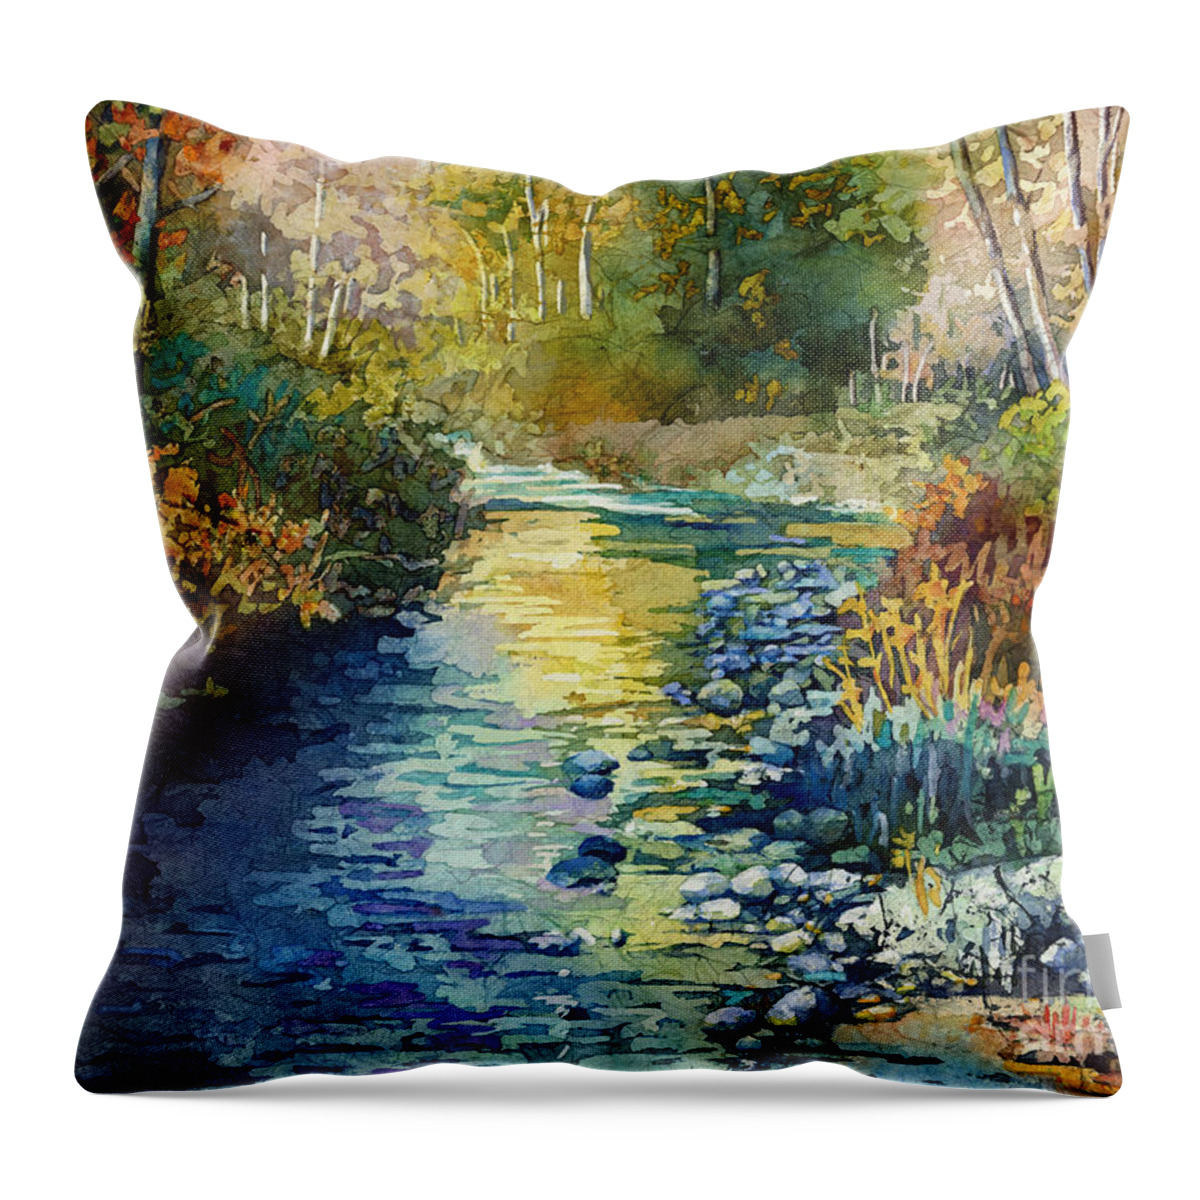 Creek Throw Pillow featuring the painting Creekside Tranquility by Hailey E Herrera